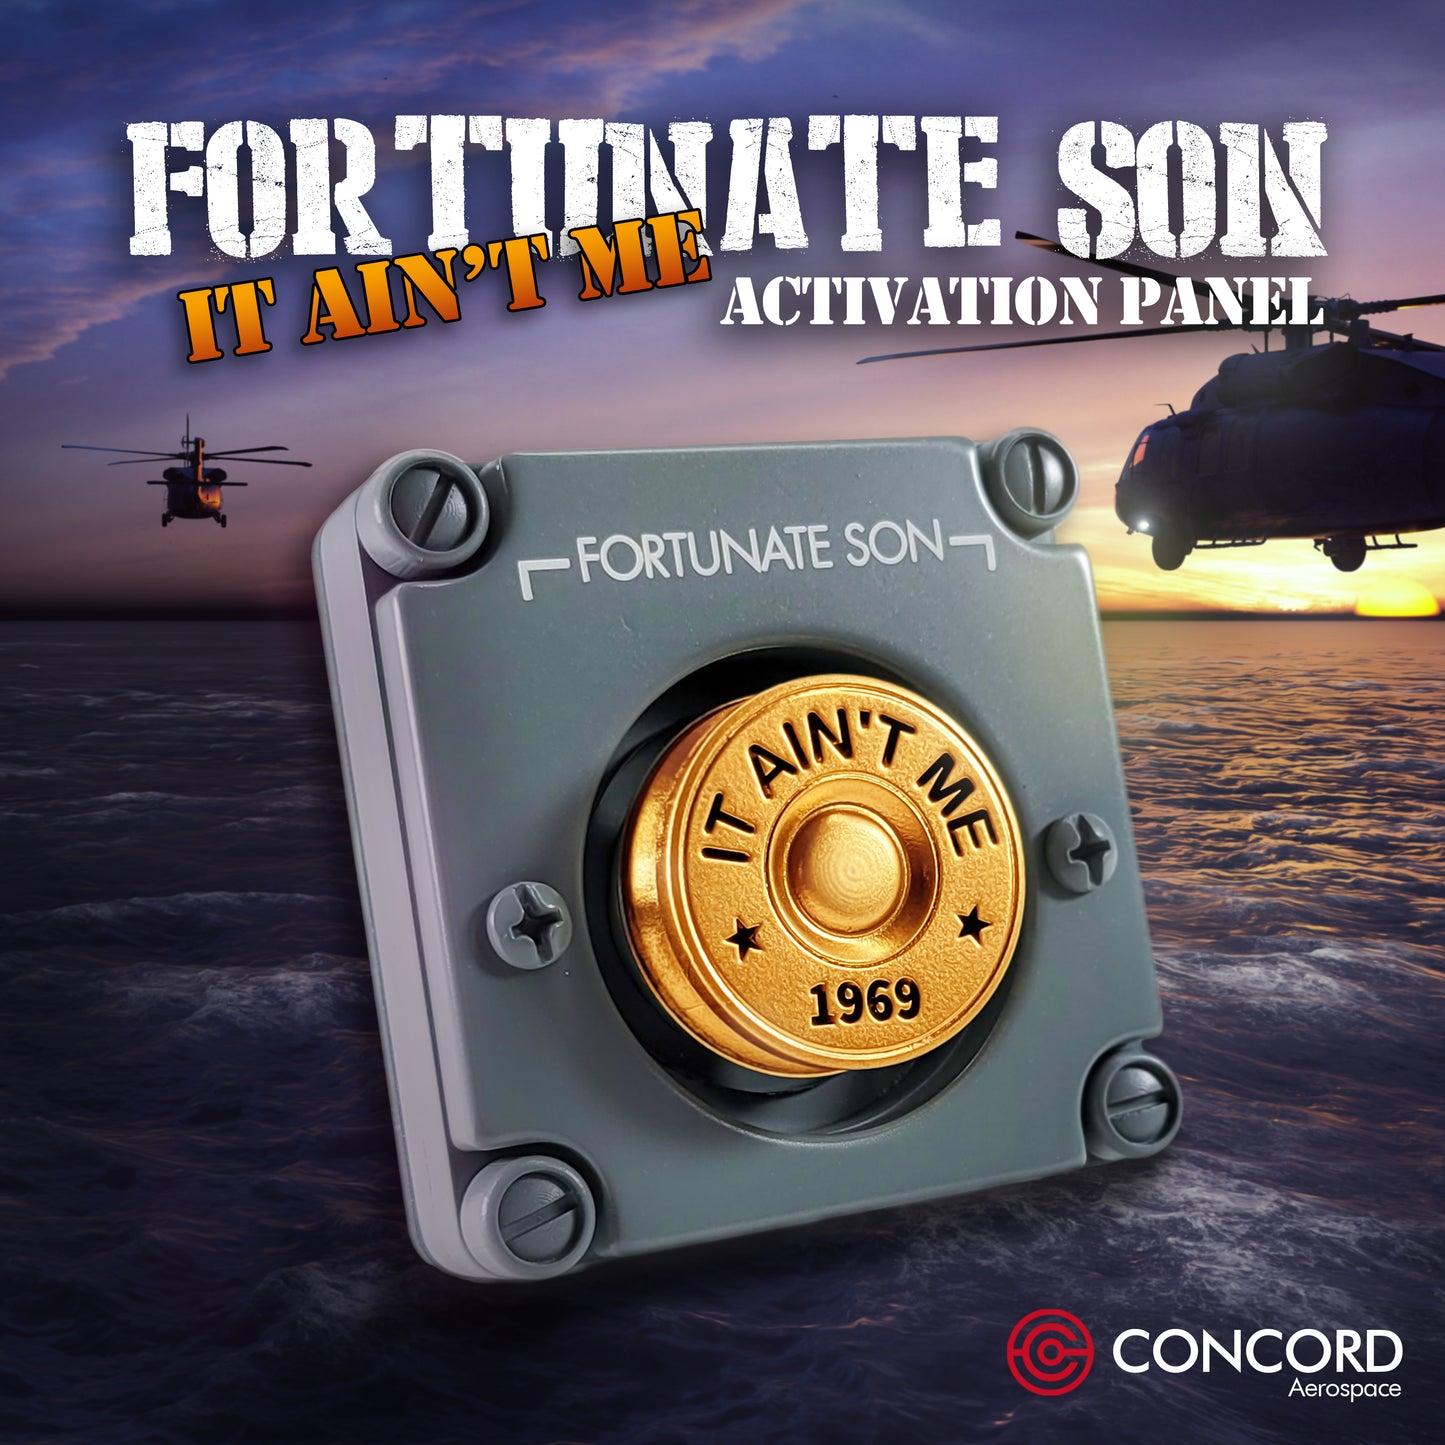 FORTUNATE SON PANEL - Concord Aerospace IT AIN'T ME (MOMENTARY BUTTON -12V) Concord Aerospace Concord Aerospace SPACE SWITCH - SINGLE